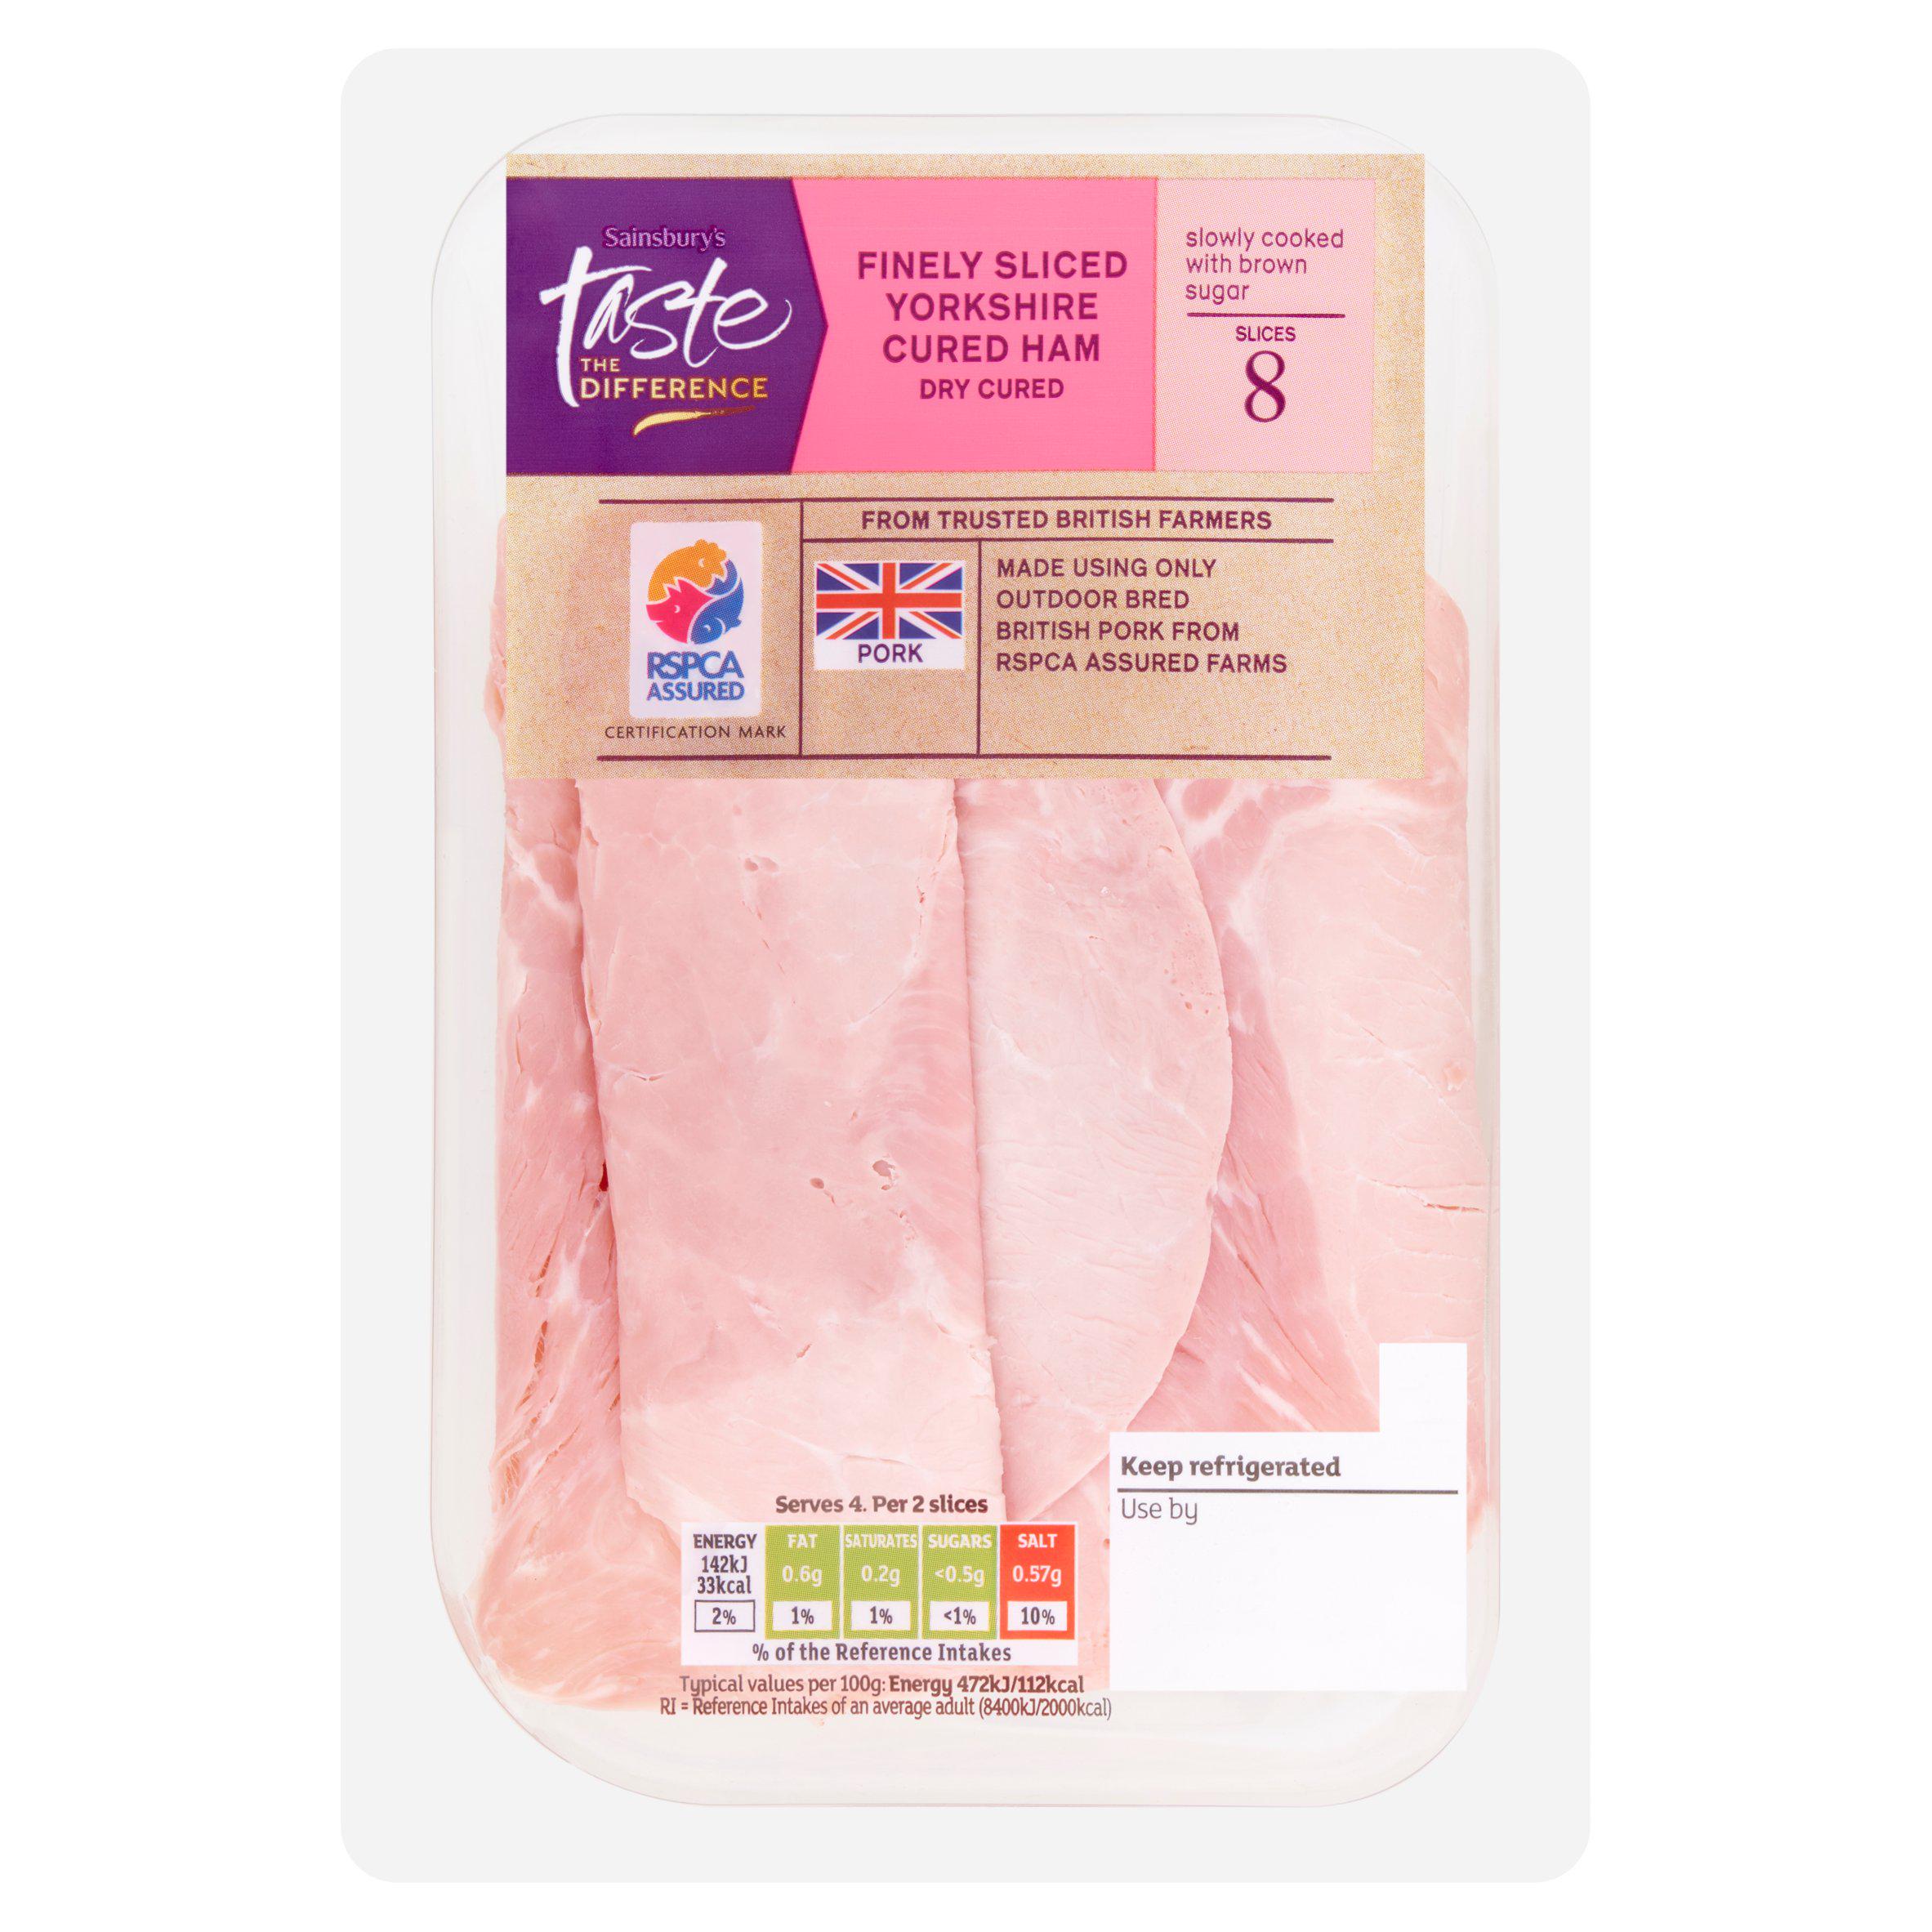 Sainsbury's Finely Sliced Yorkshire Dry Cured Cooked British Ham, Taste the Difference 120g